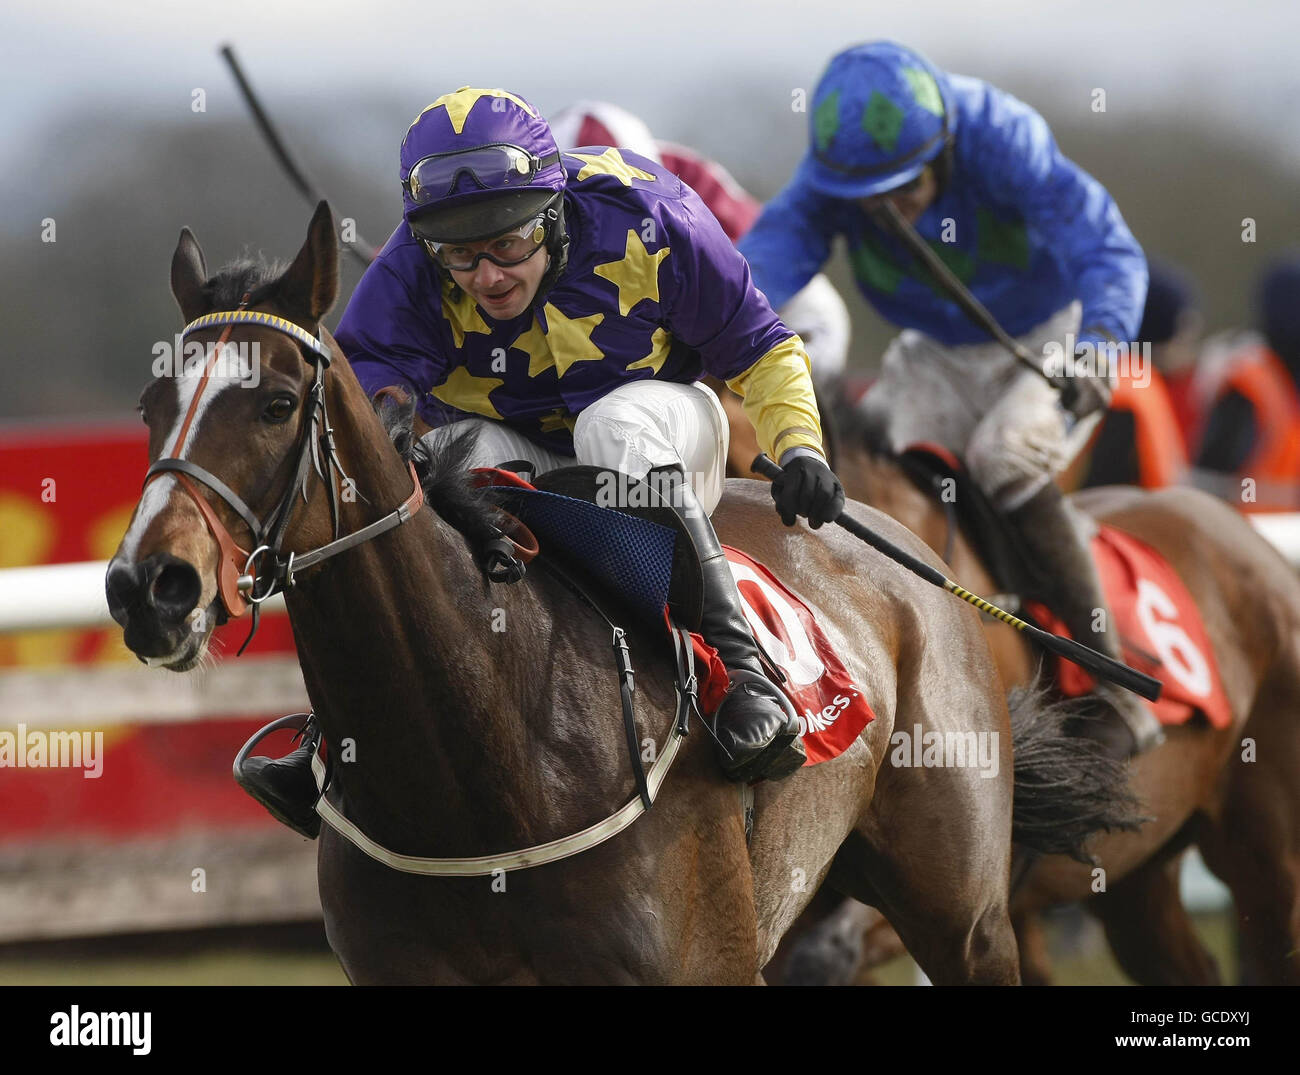 Horse Racing - Easter Festival - Day Three - Fairyhouse Racecourse. Un Hinged ridden by Alan Crowe wins the Ladbrooks.com Handicap Hurdle during the Easter Festival at Fairyhouse Racecourse, Co Meath, Ireland. Stock Photo